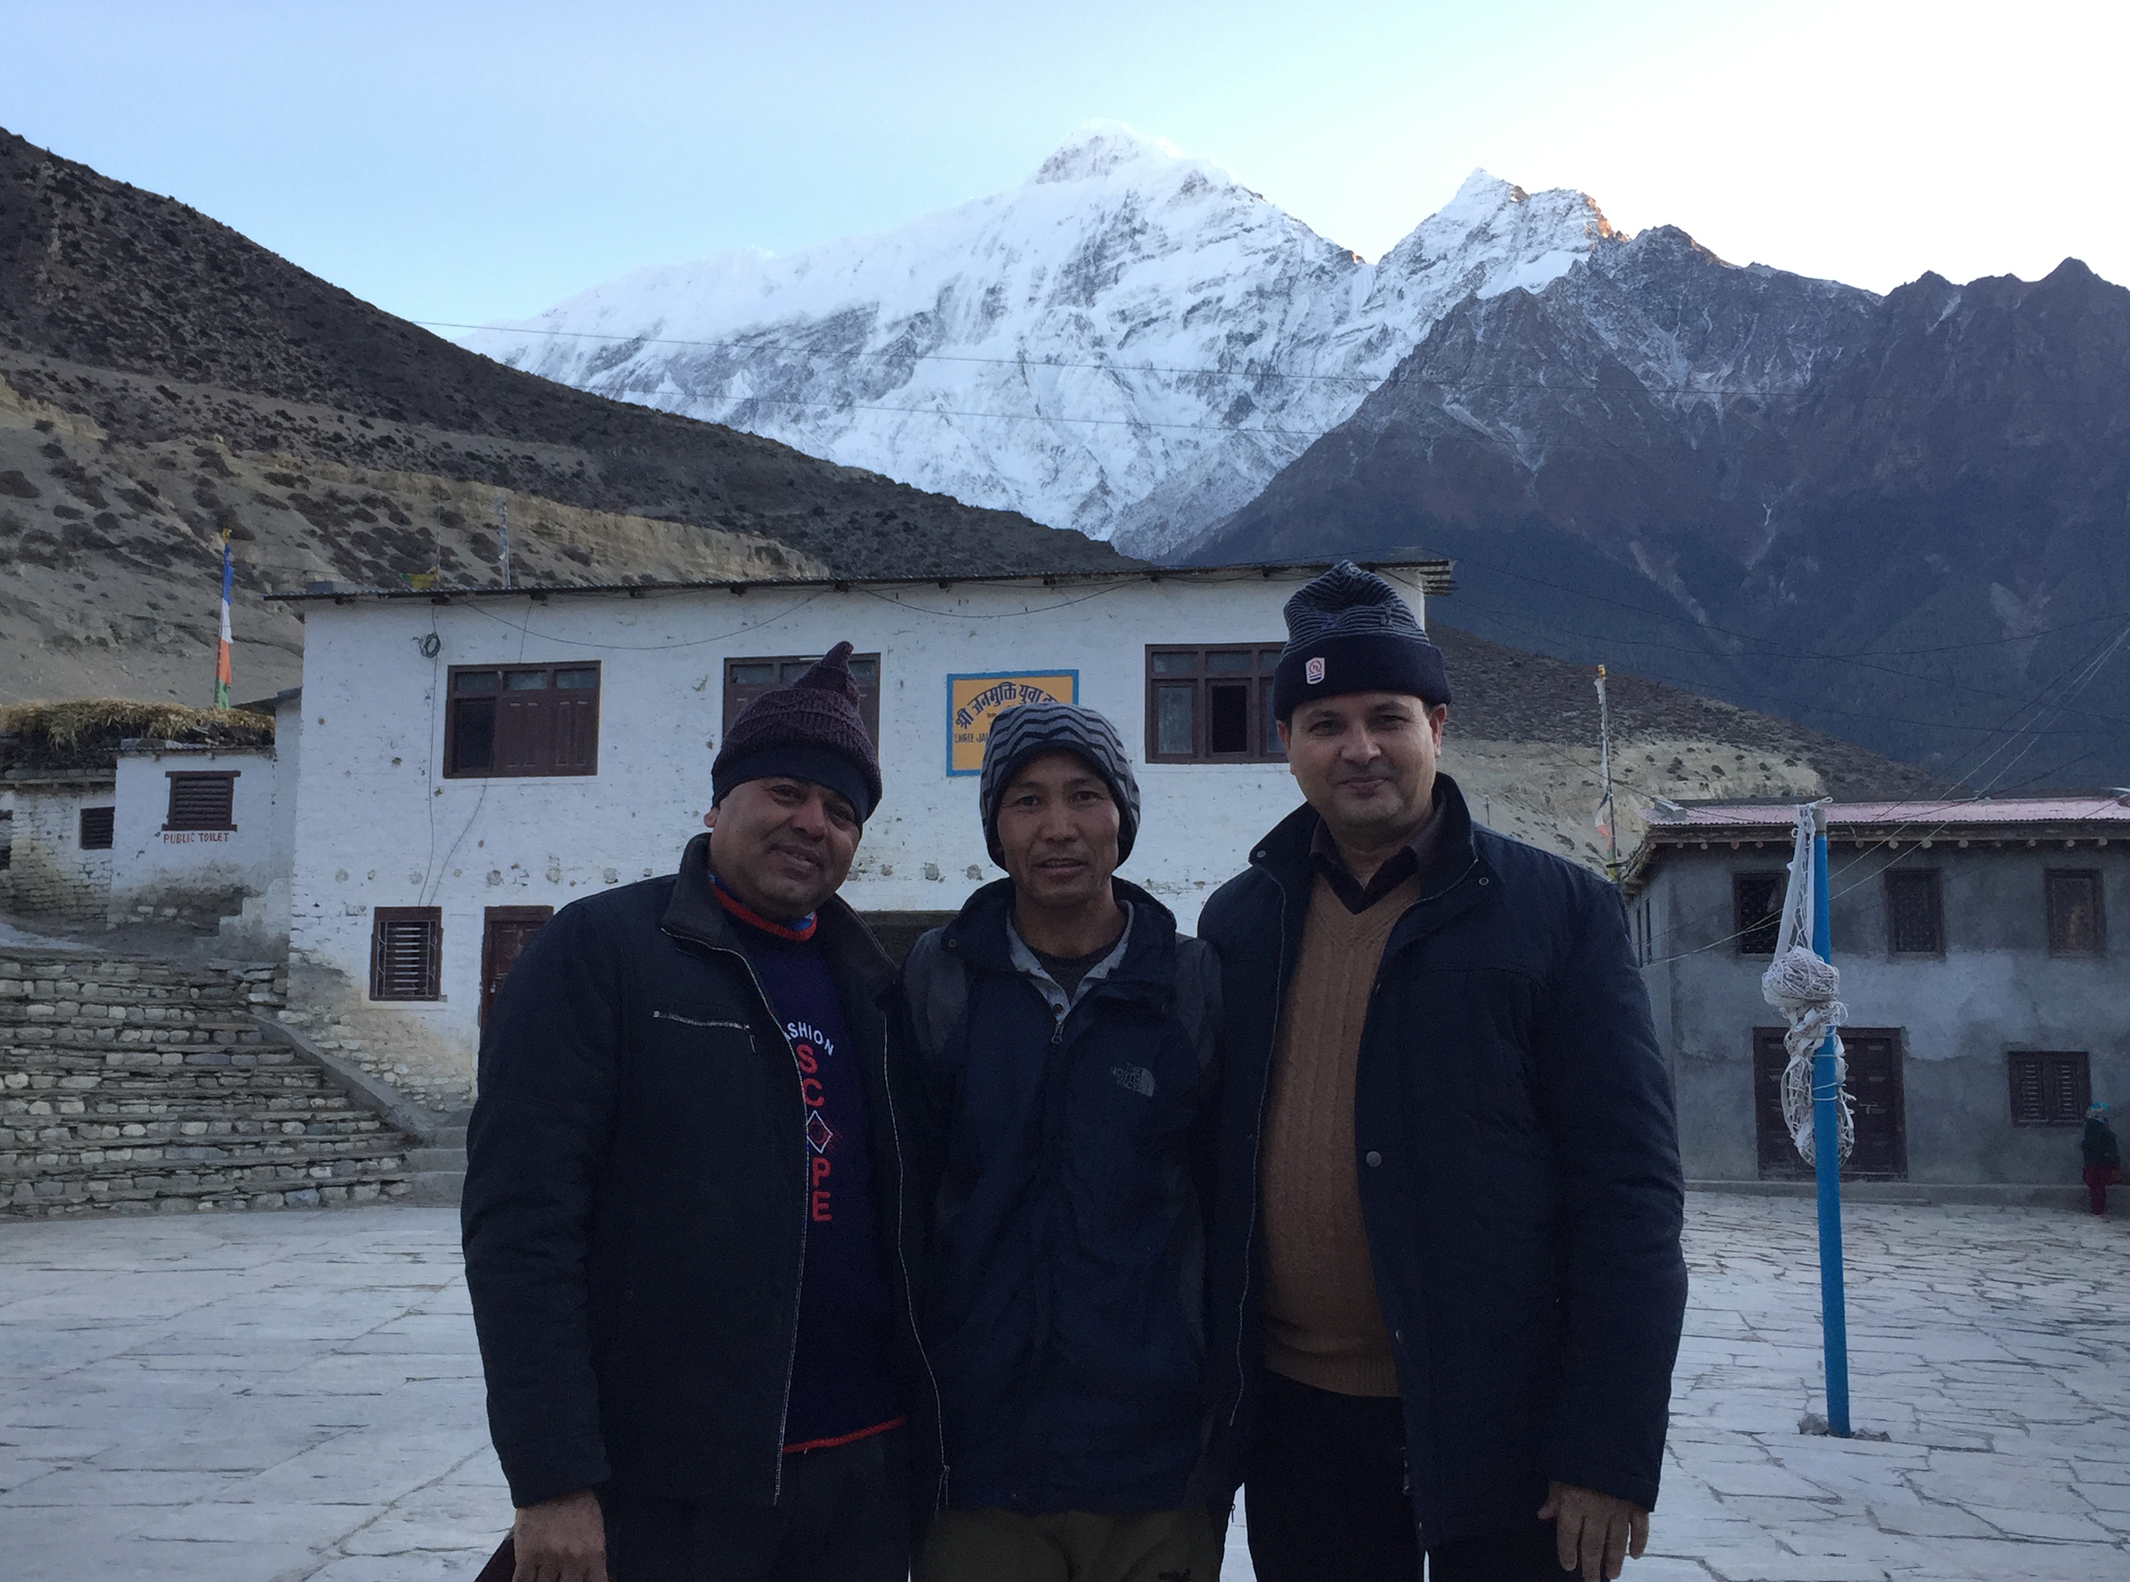 Two important pillars of public health programs in Mustang district. Mr Tika and Karna you are a wonderful team committed to public health services.